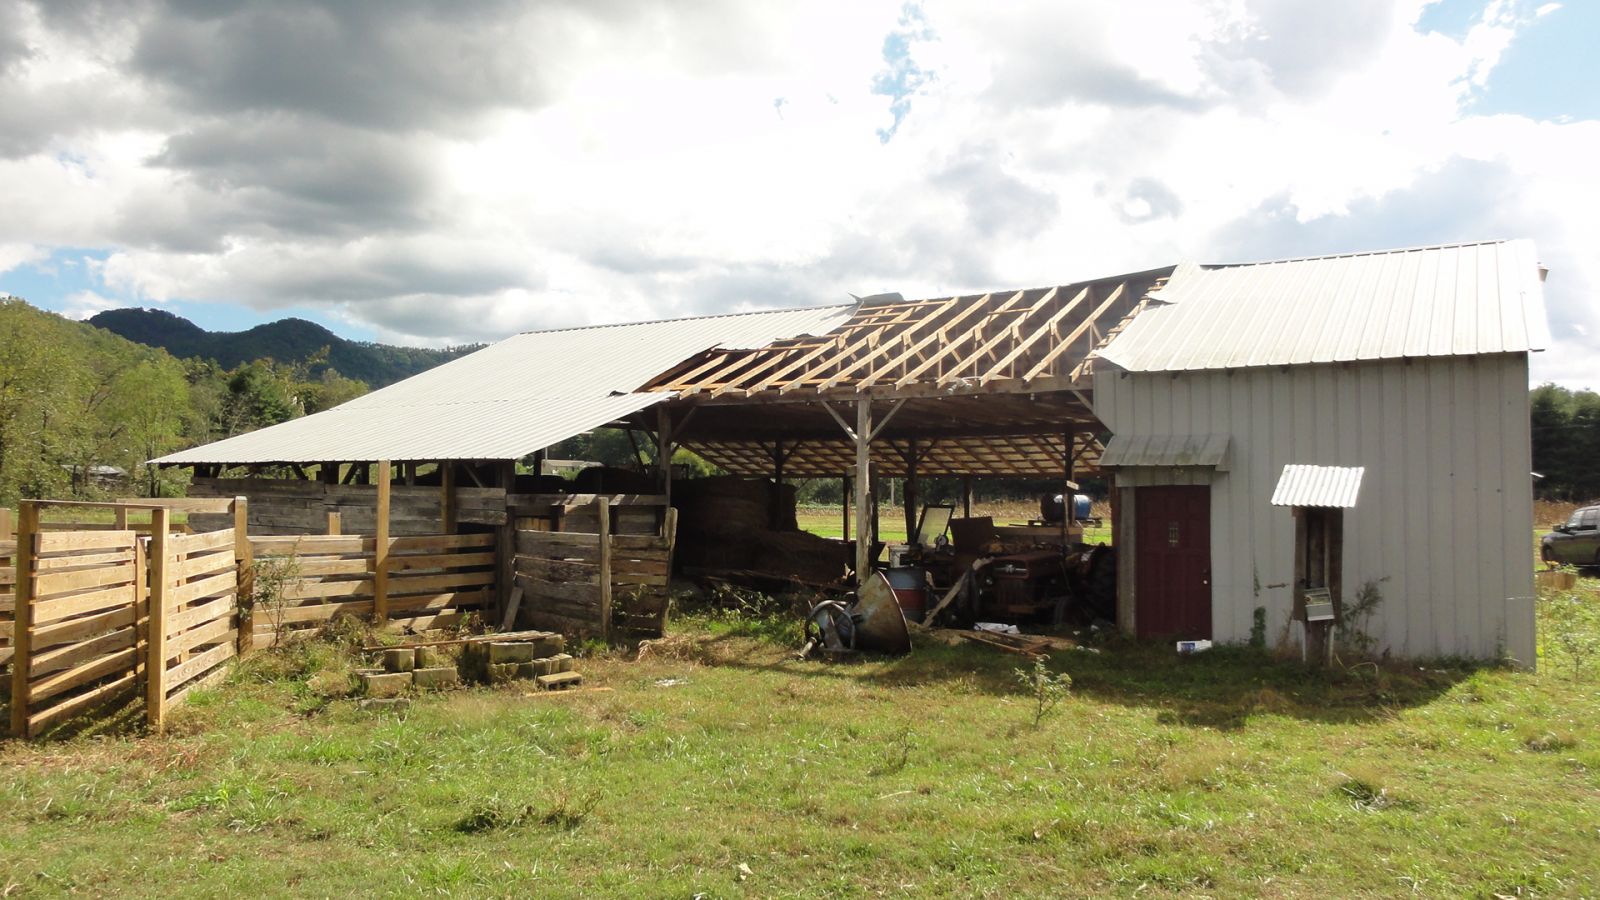 Roof damage to an outbuilding in the evening of 14 October 2014, in McDowell County, North Carolina